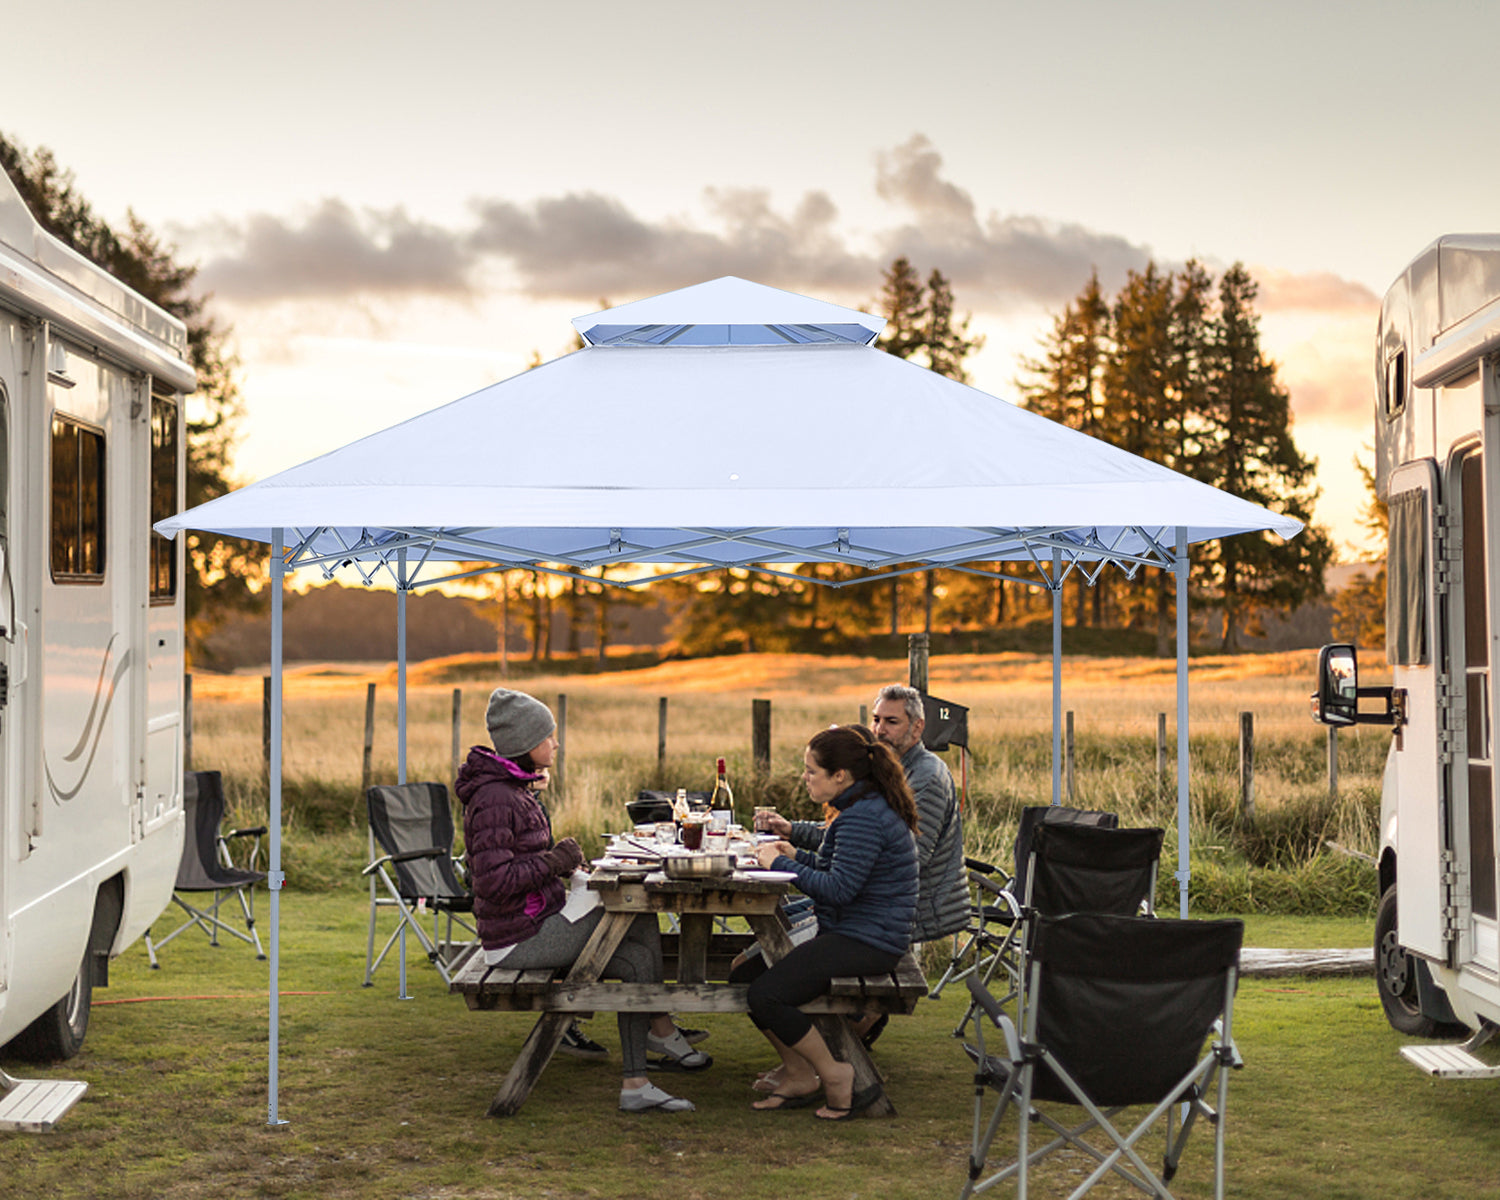 ABCCANOPY 13 ft x13 ft Outdoor Gazebo Pop up Sun Shade Canopy Tent, White